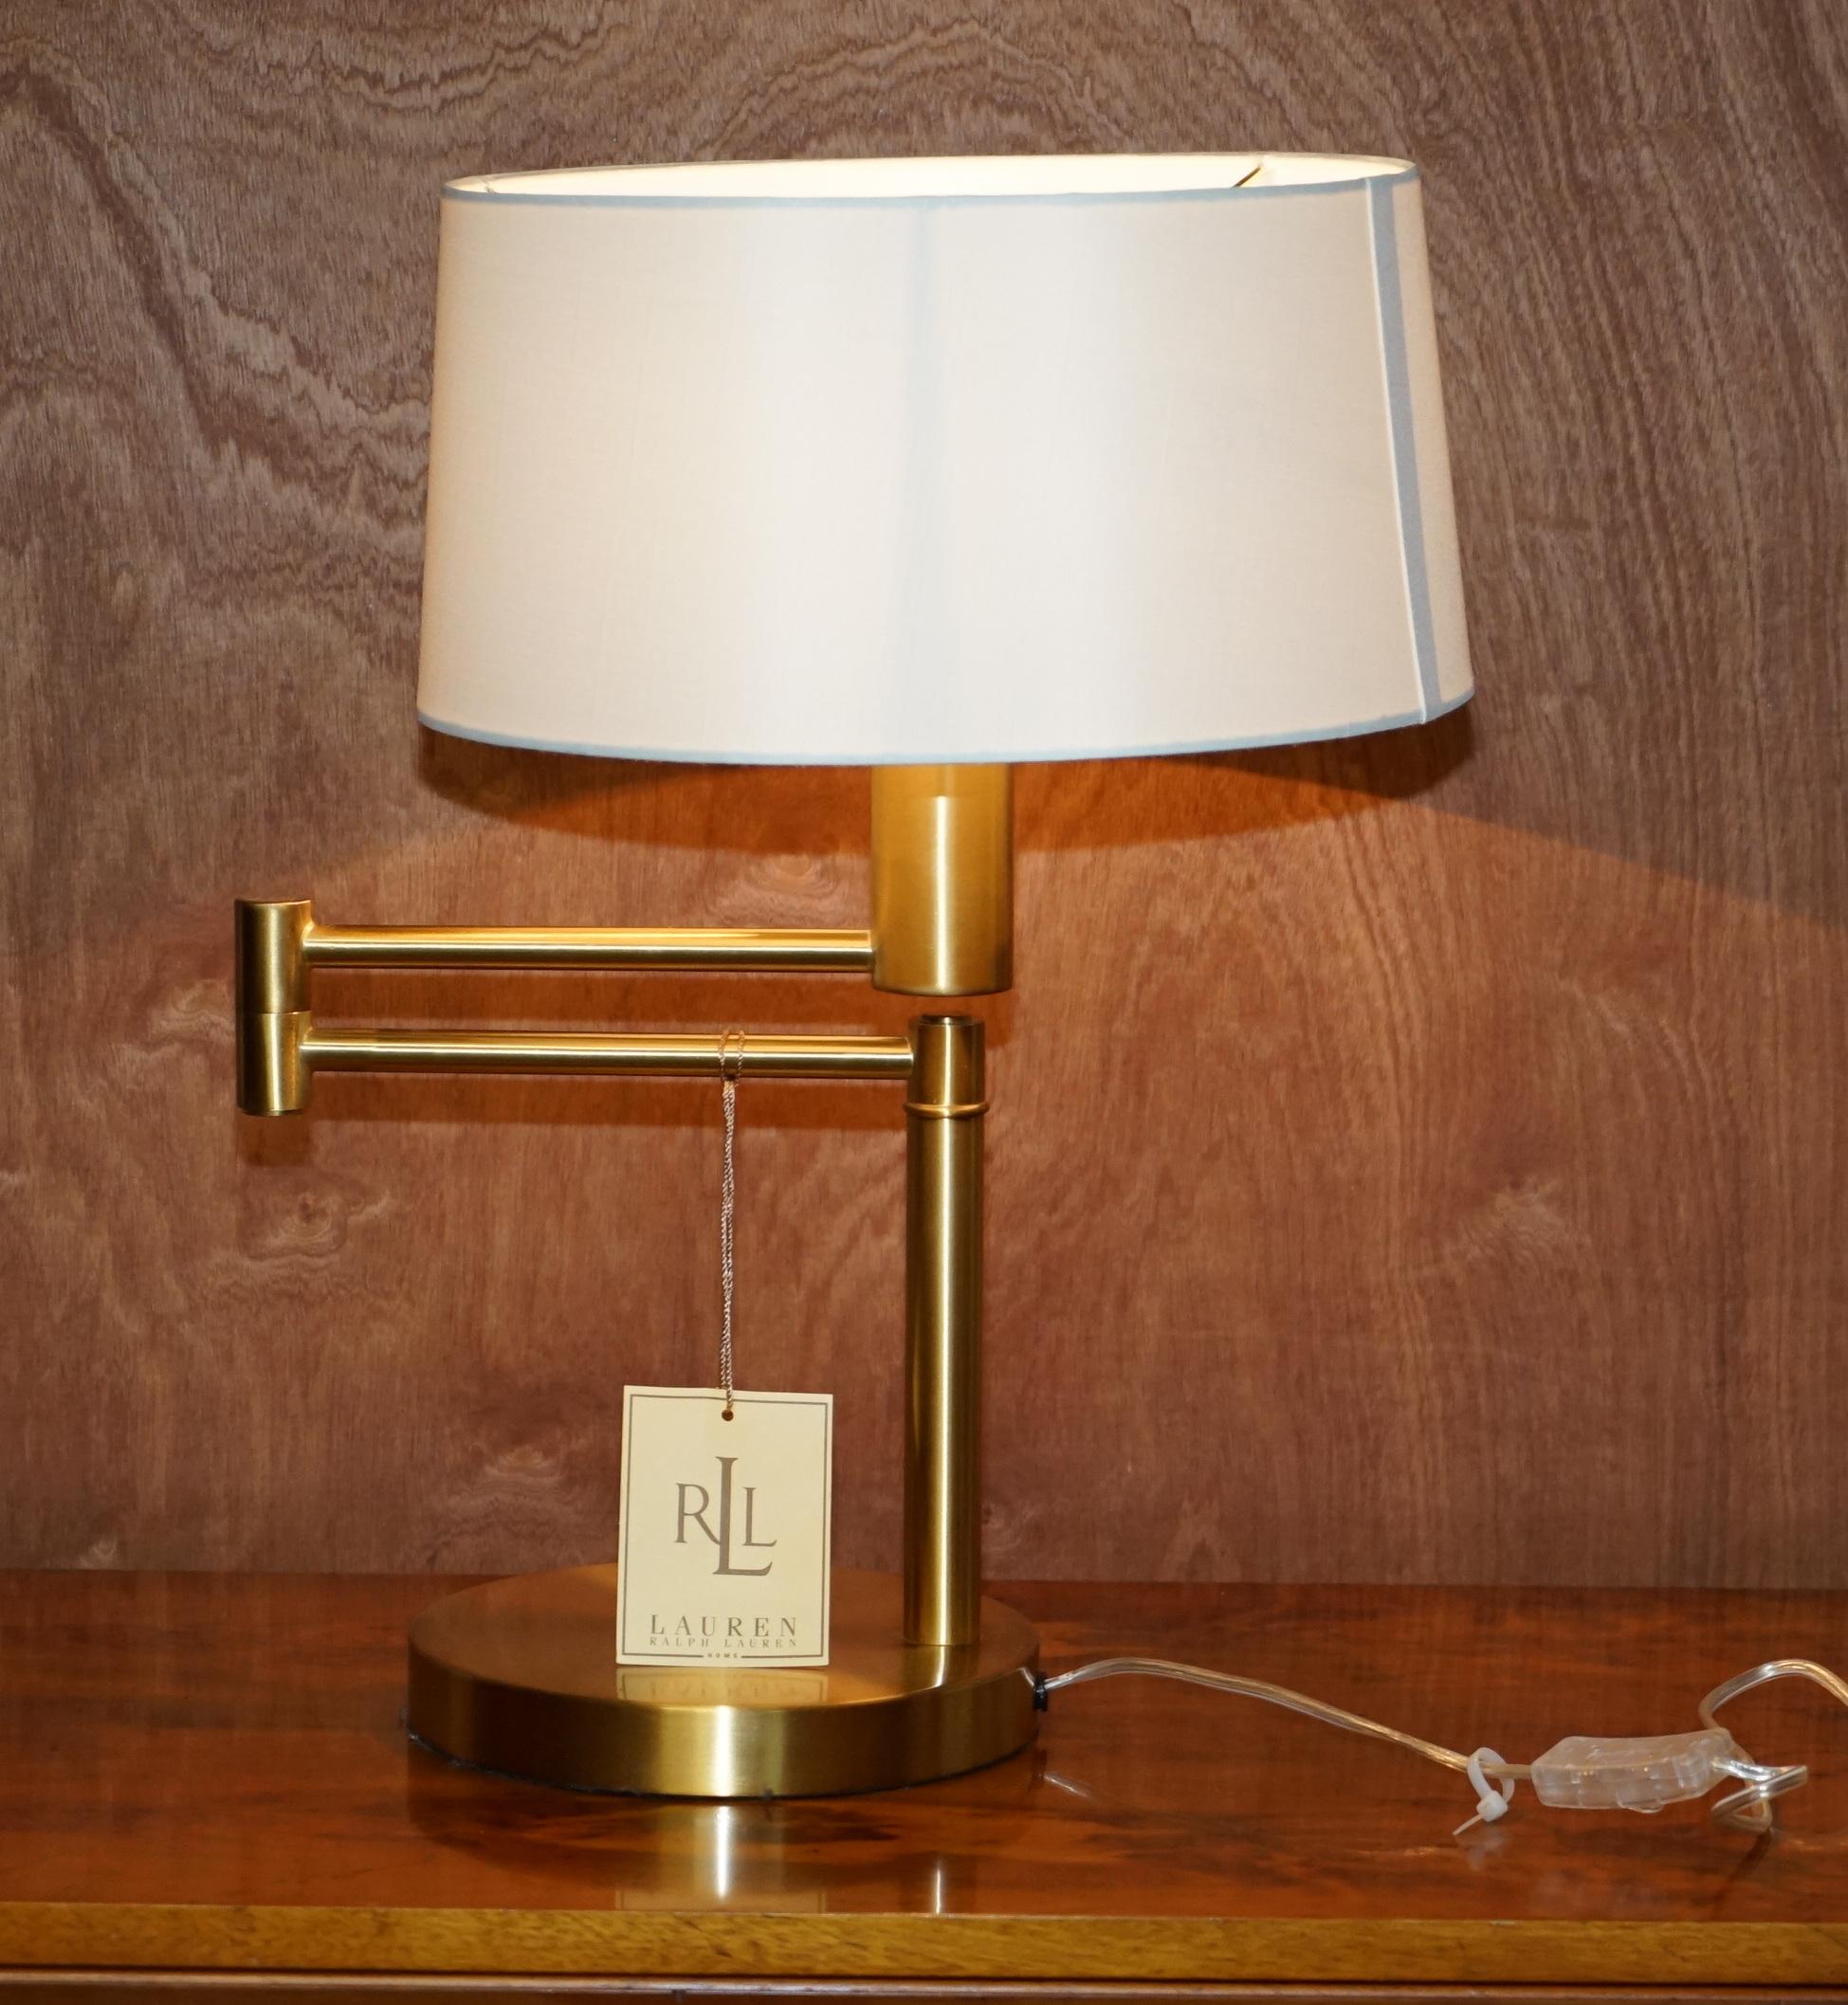 We are delighted to offer for sale this lovely pair of brand new Ralph Lauren Home gilt brass articulated lamps with shades

A good looking and decorative pair, they are brand new with original tags, the bulbs are not included

These lamps have